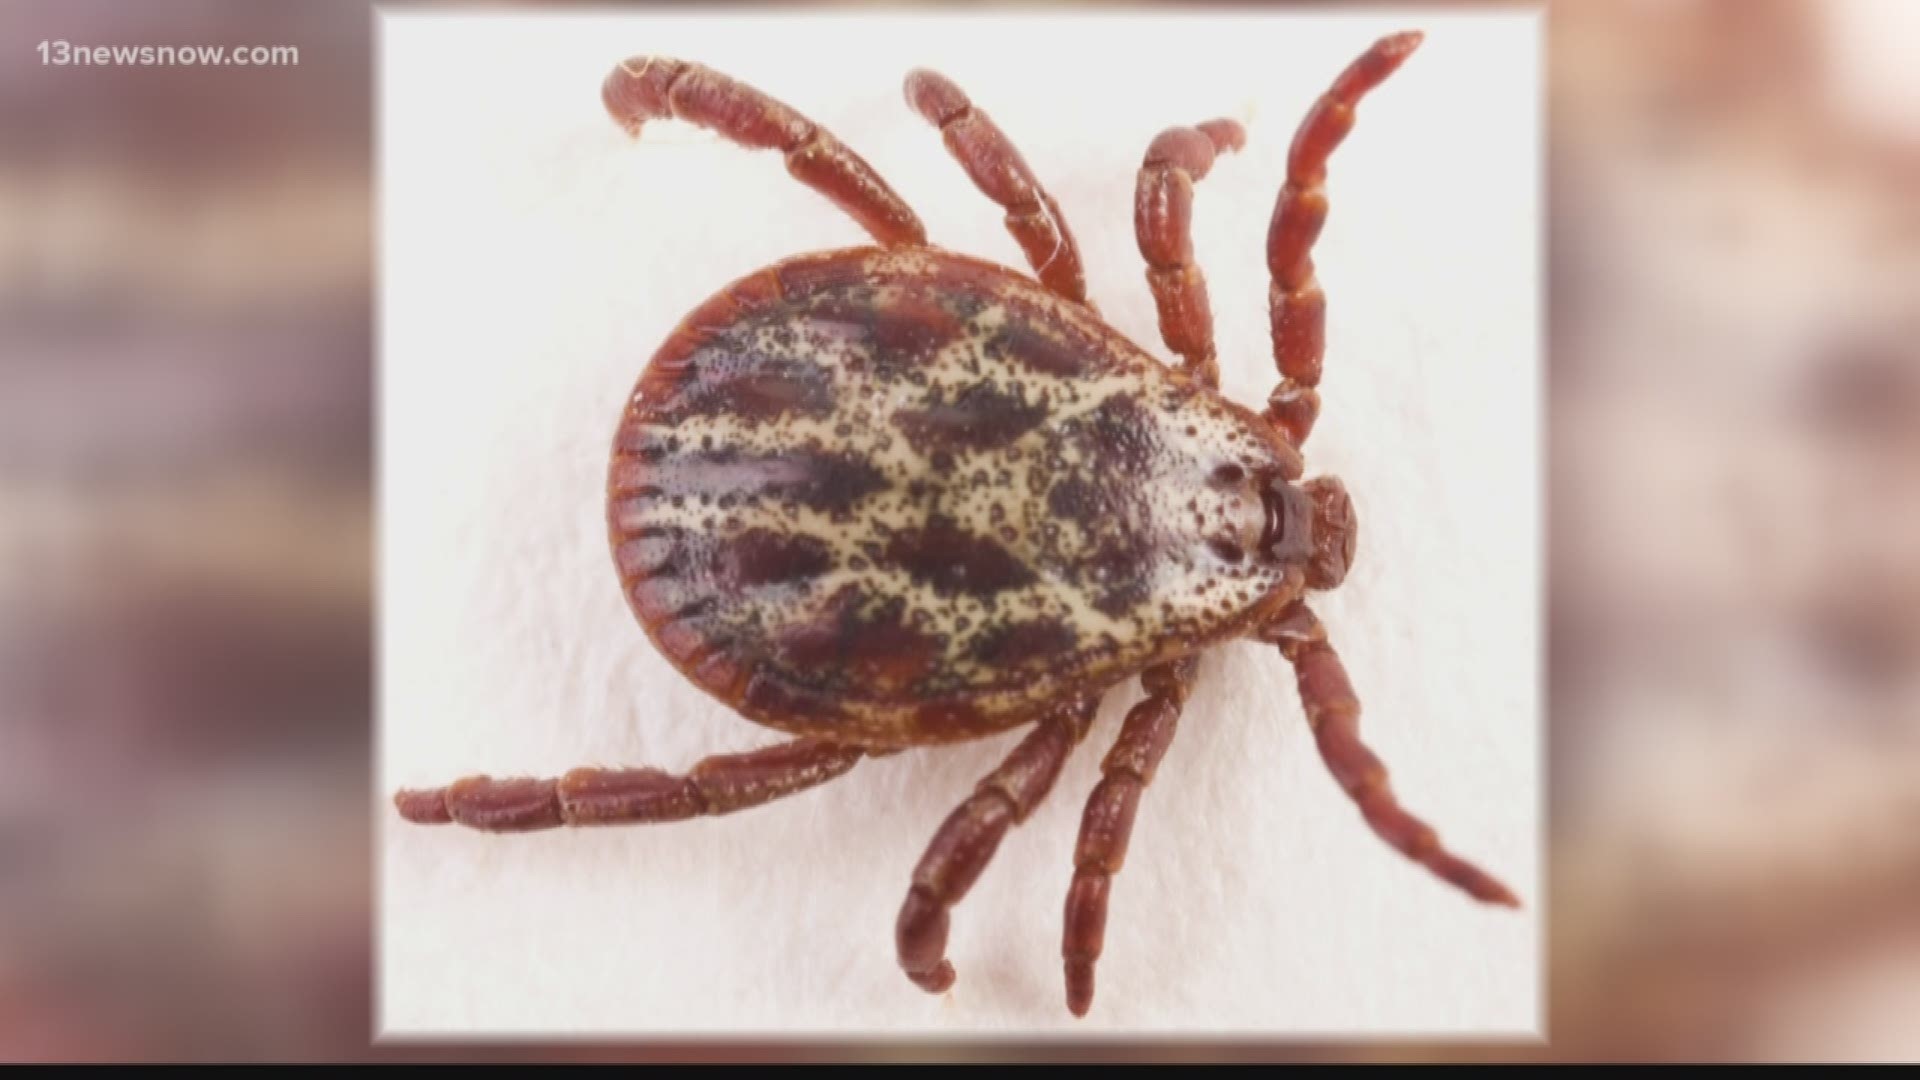 A viewer said she's seen posts on Facebook claiming tea tree oil can repel ticks. Our Verify team talked to the experts.